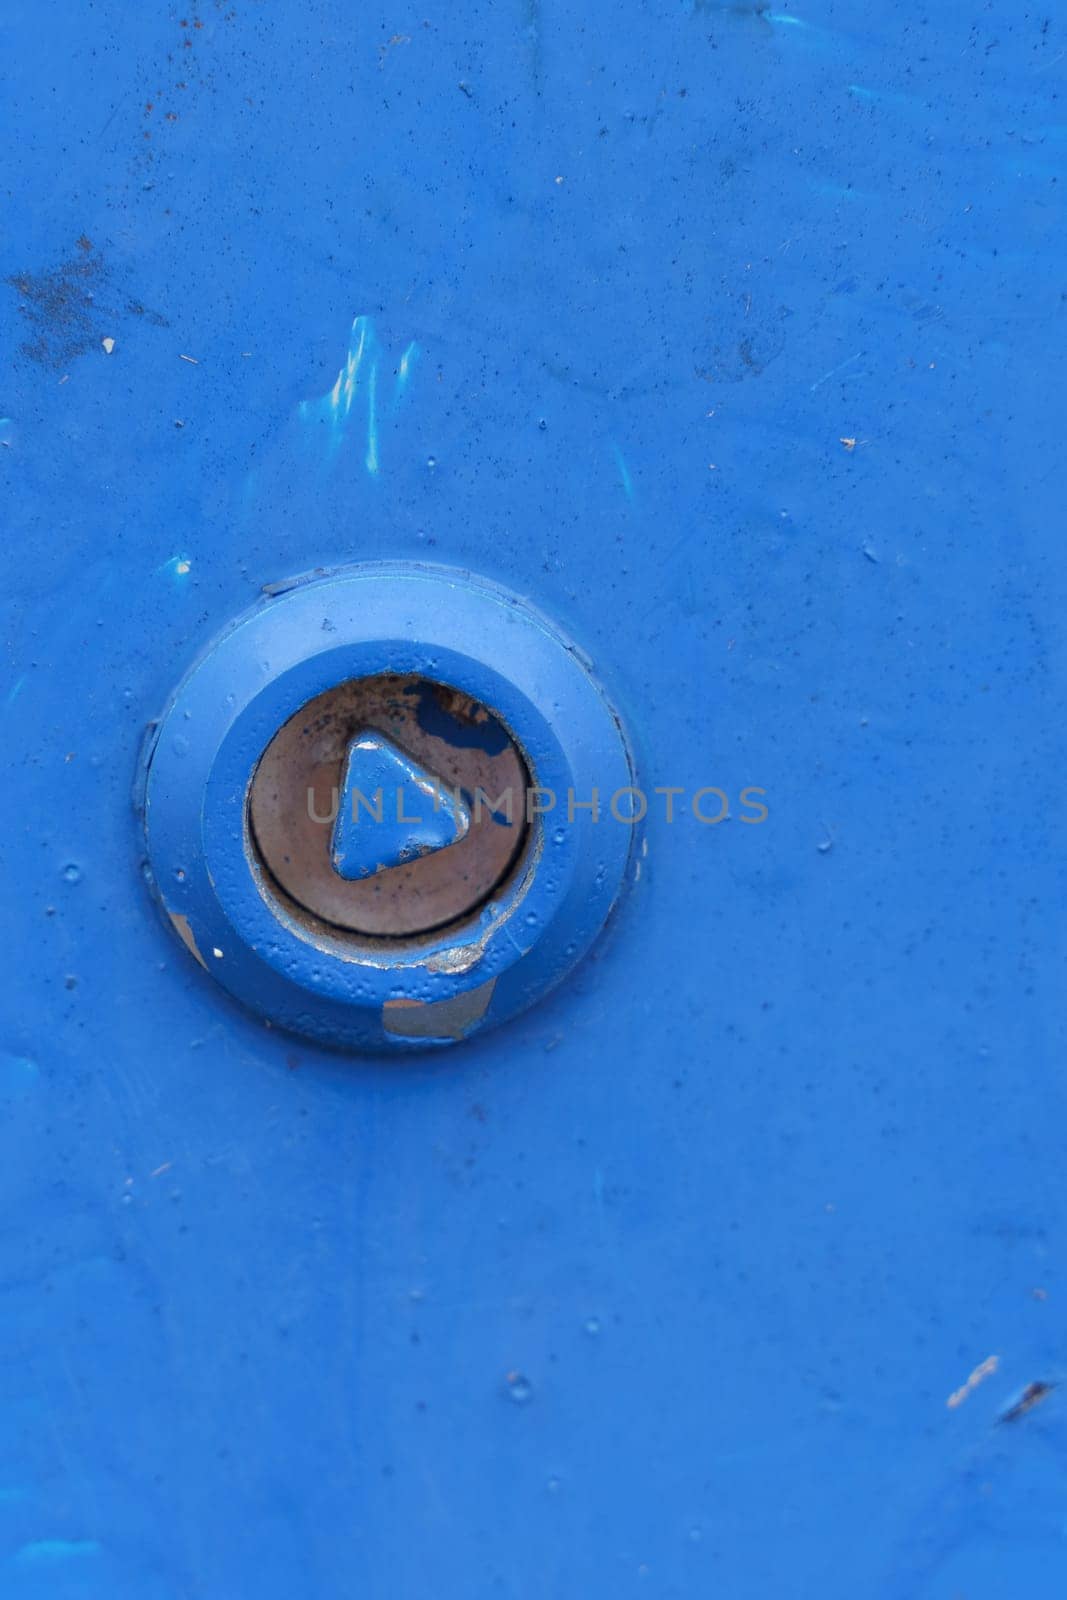 A detailed view showing a rusty bolt embedded in a textured blue metal surface, highlighting the contrast between the worn metal elements and the vibrant blue paint.